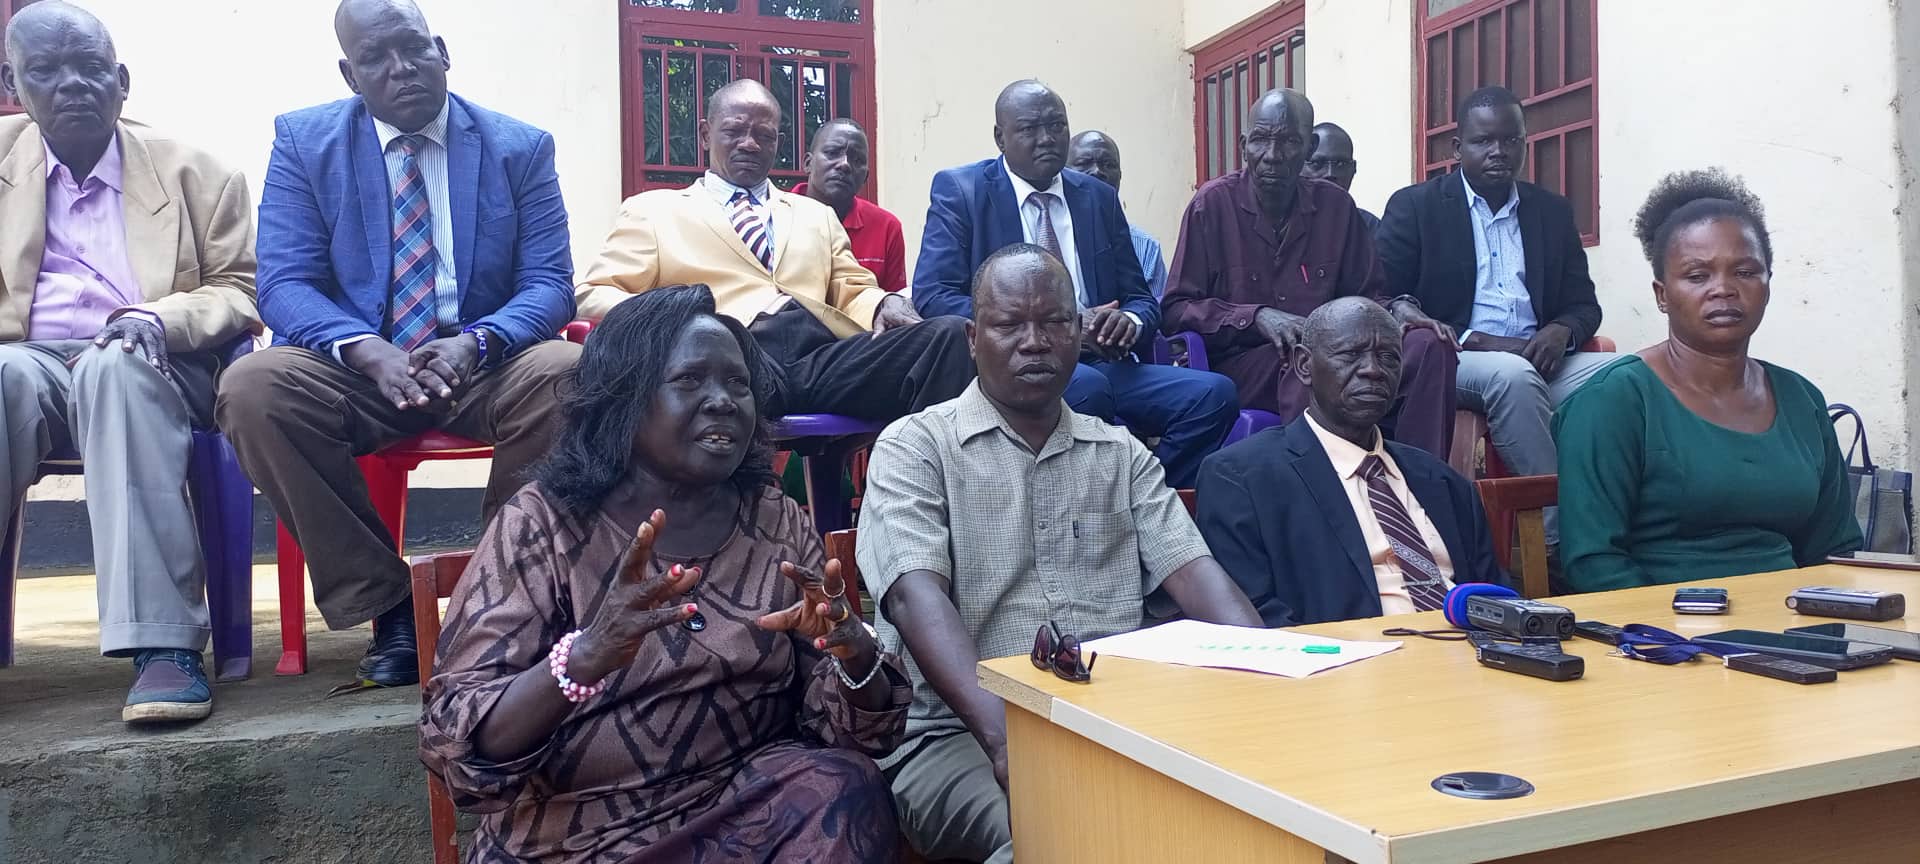 Toposa Juba dwellers want wounded invaders punished